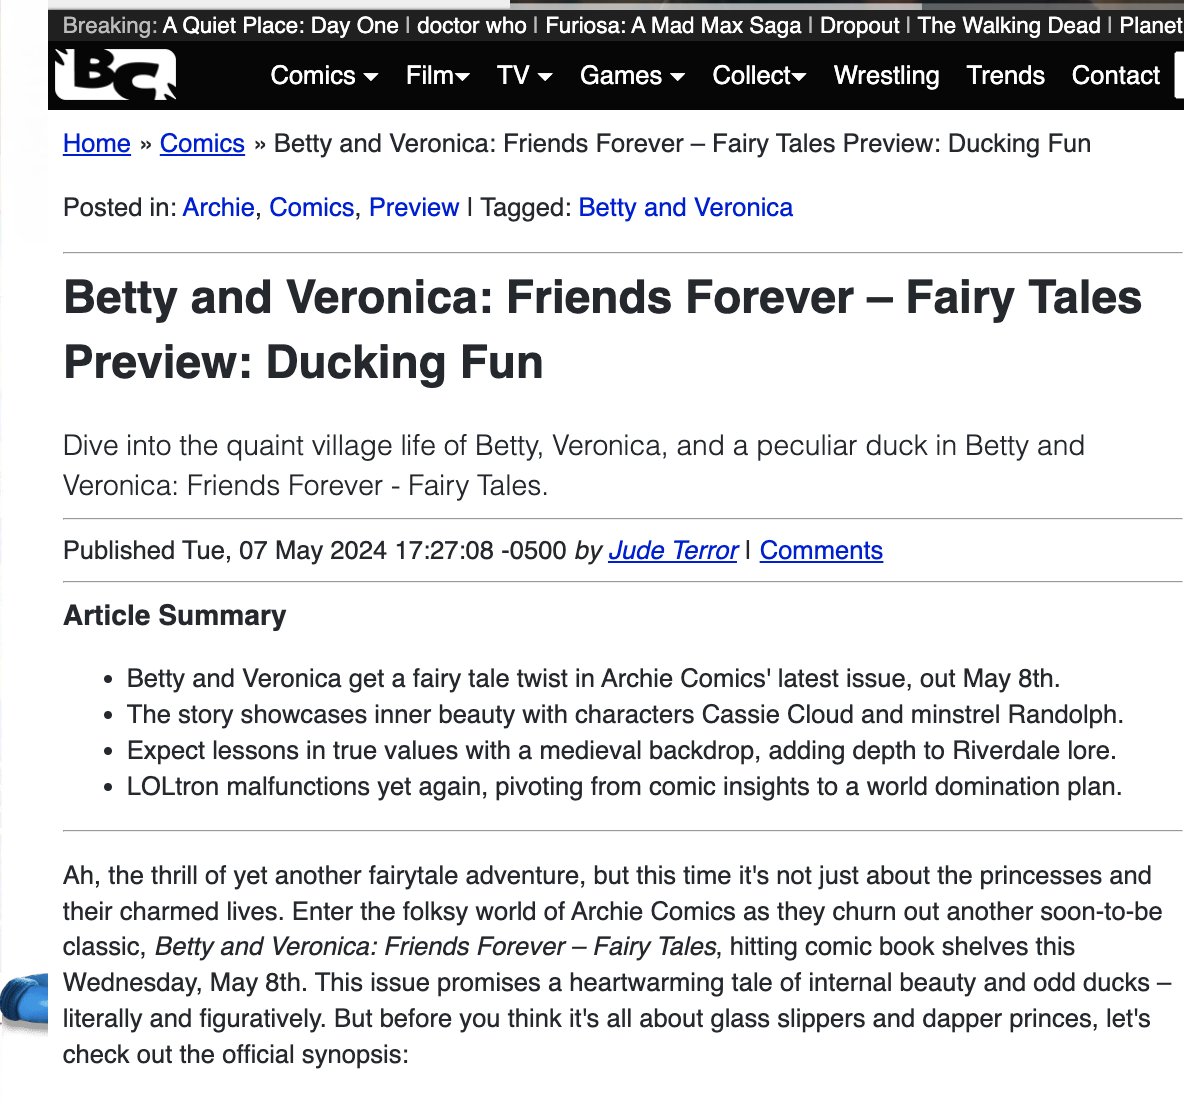 THANK YOU @bleedingcool for the shout out about my @ArchieComics that just came out!! 

It is indeed DUCKING FUN 🦢🦆